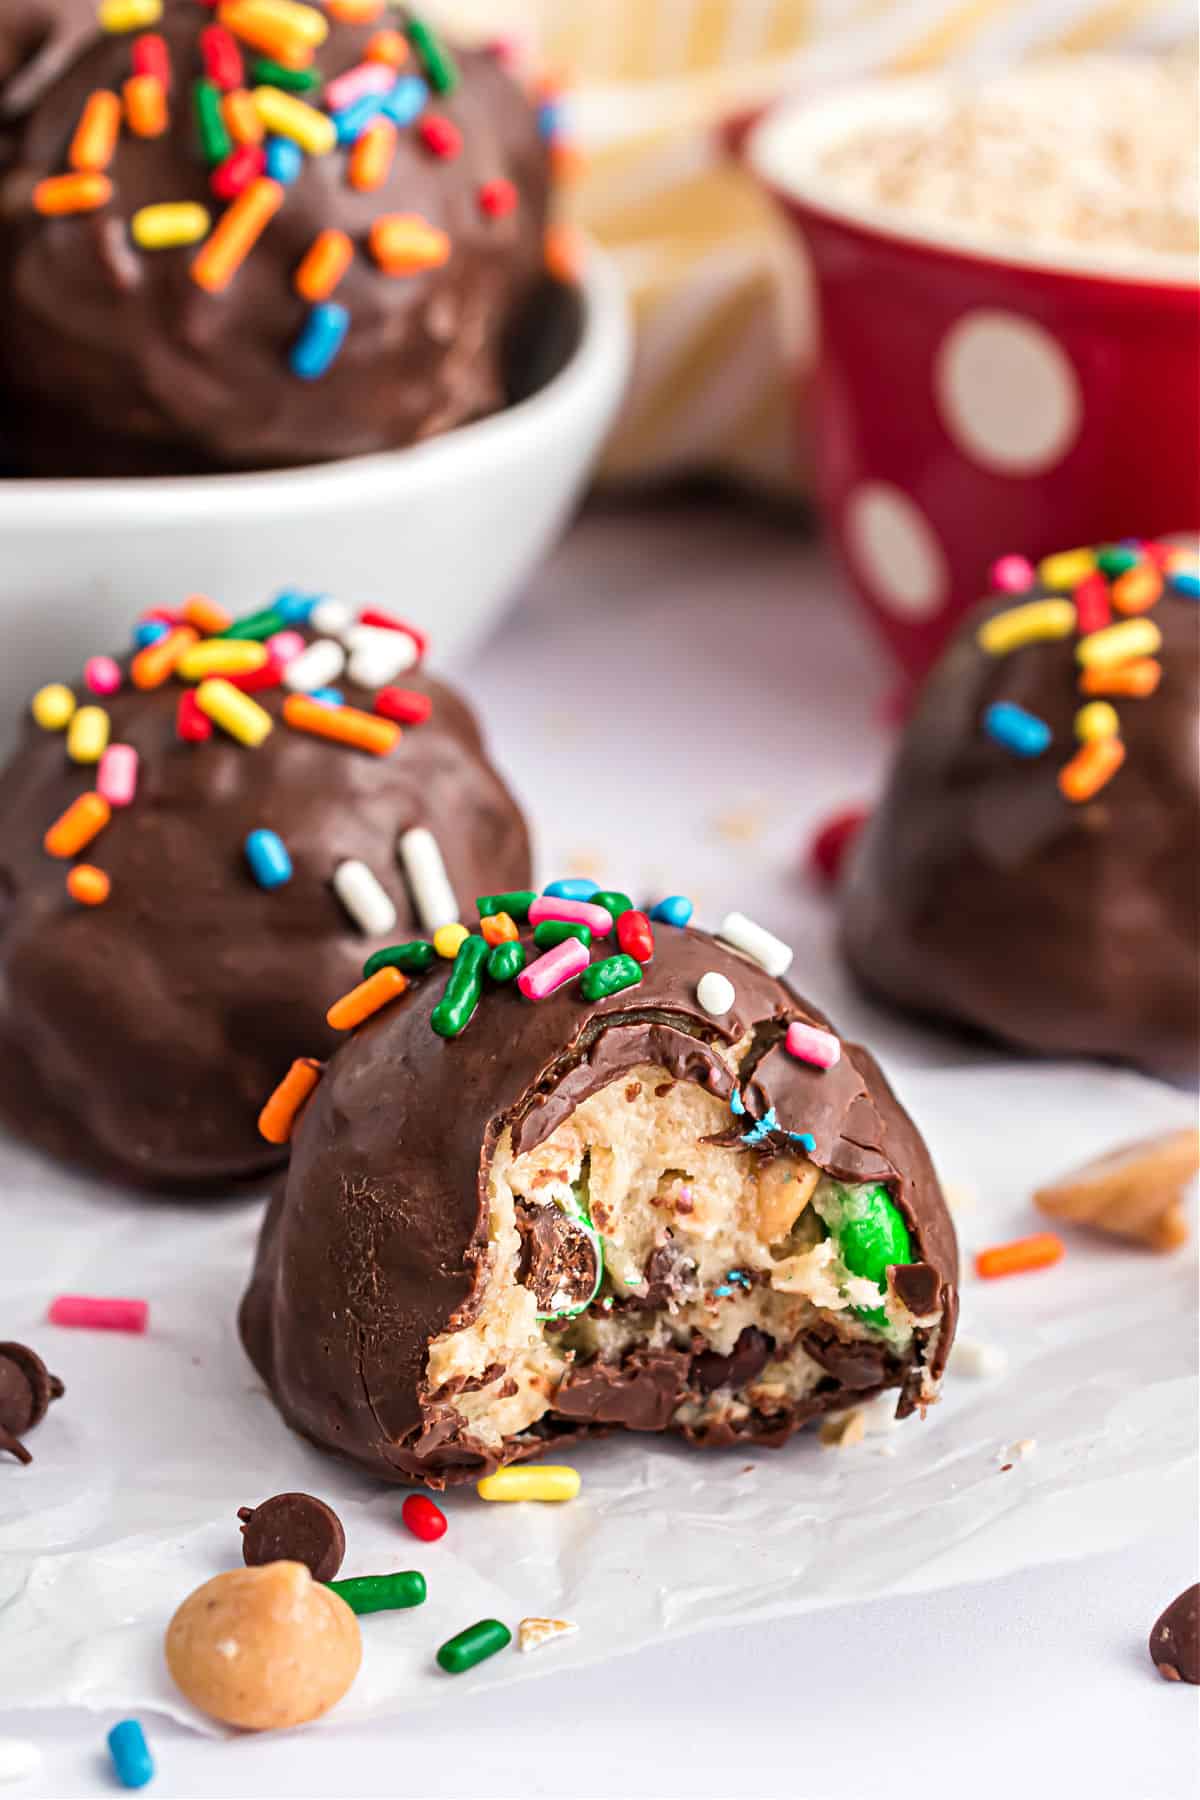 Monster cookie dough in a chocolate truffle with sprinkles.